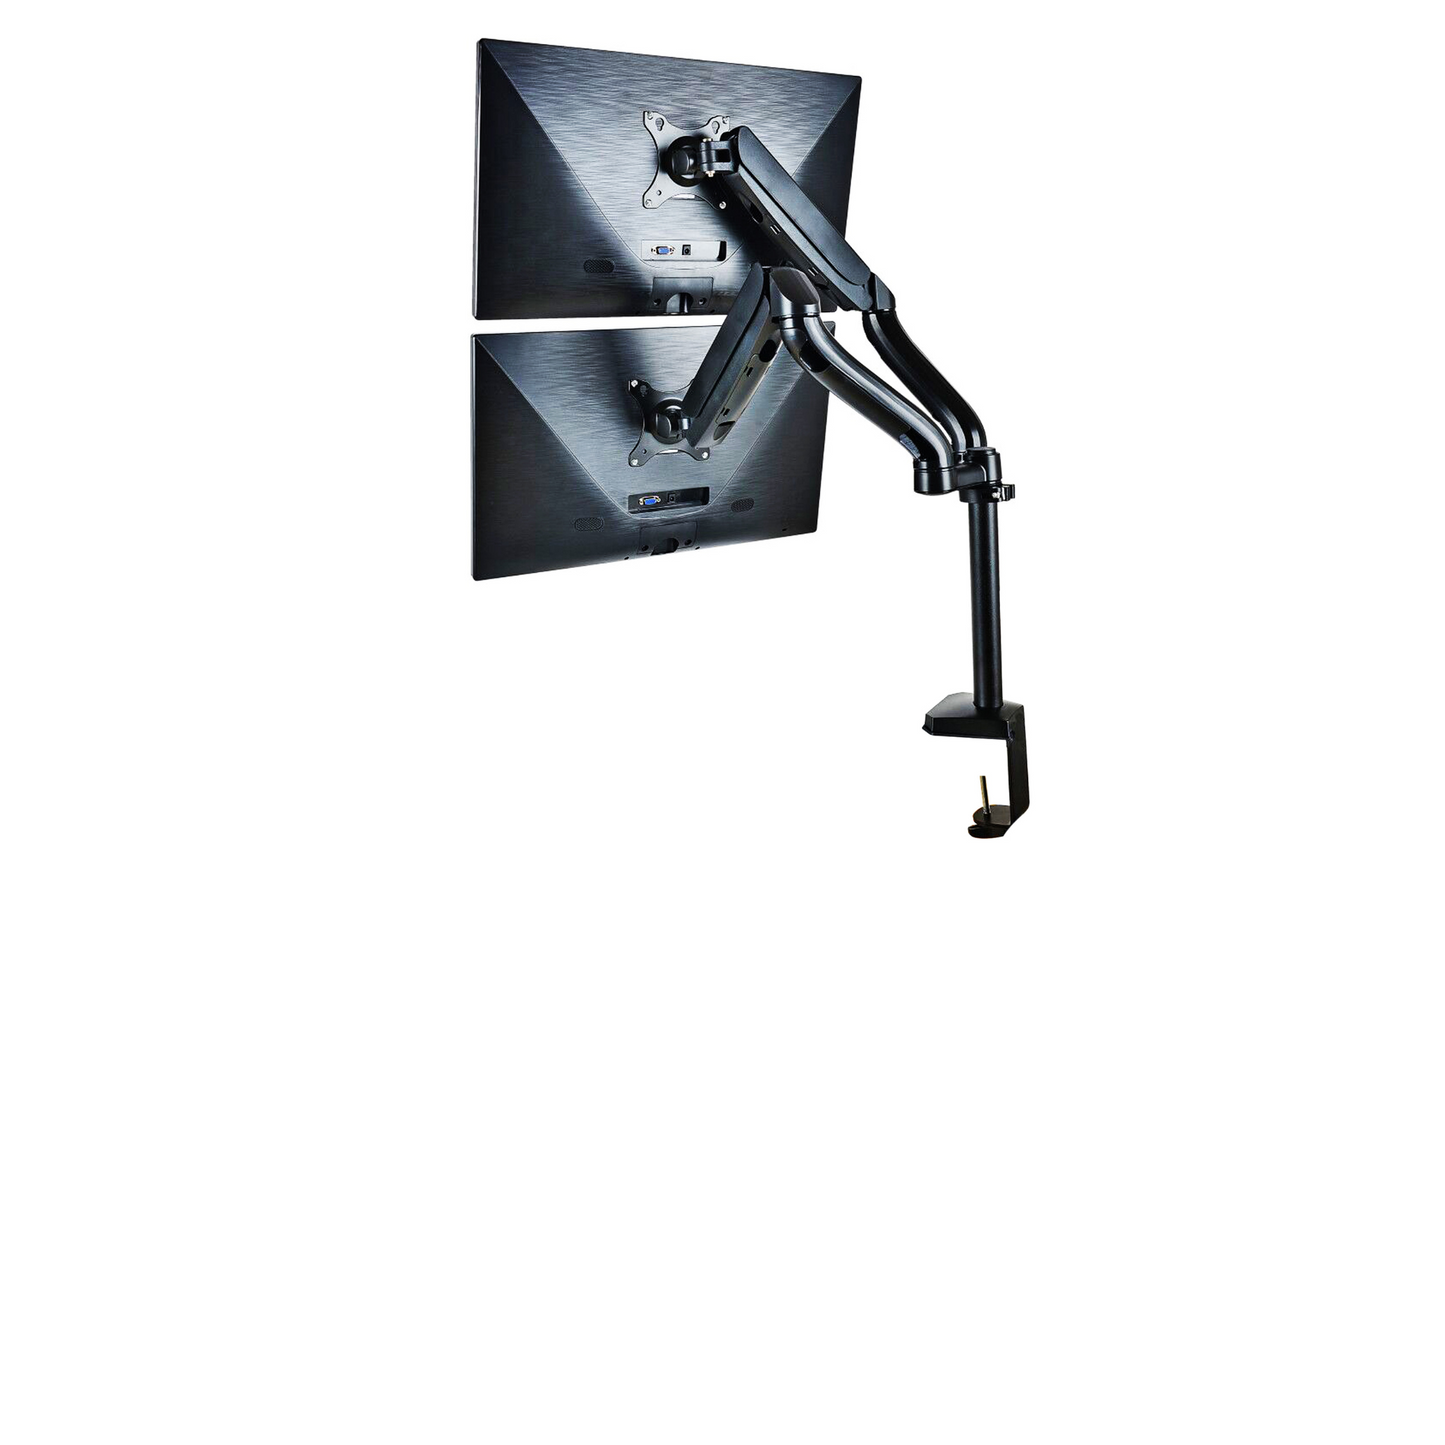 PALMAT 15-27” Aluminium Alloy Dual Monitor Stand for Two Screens, Height Adjustable, 360° Rotatable Gas Spring Arm, VESA 75-100mm with Desk Clamp